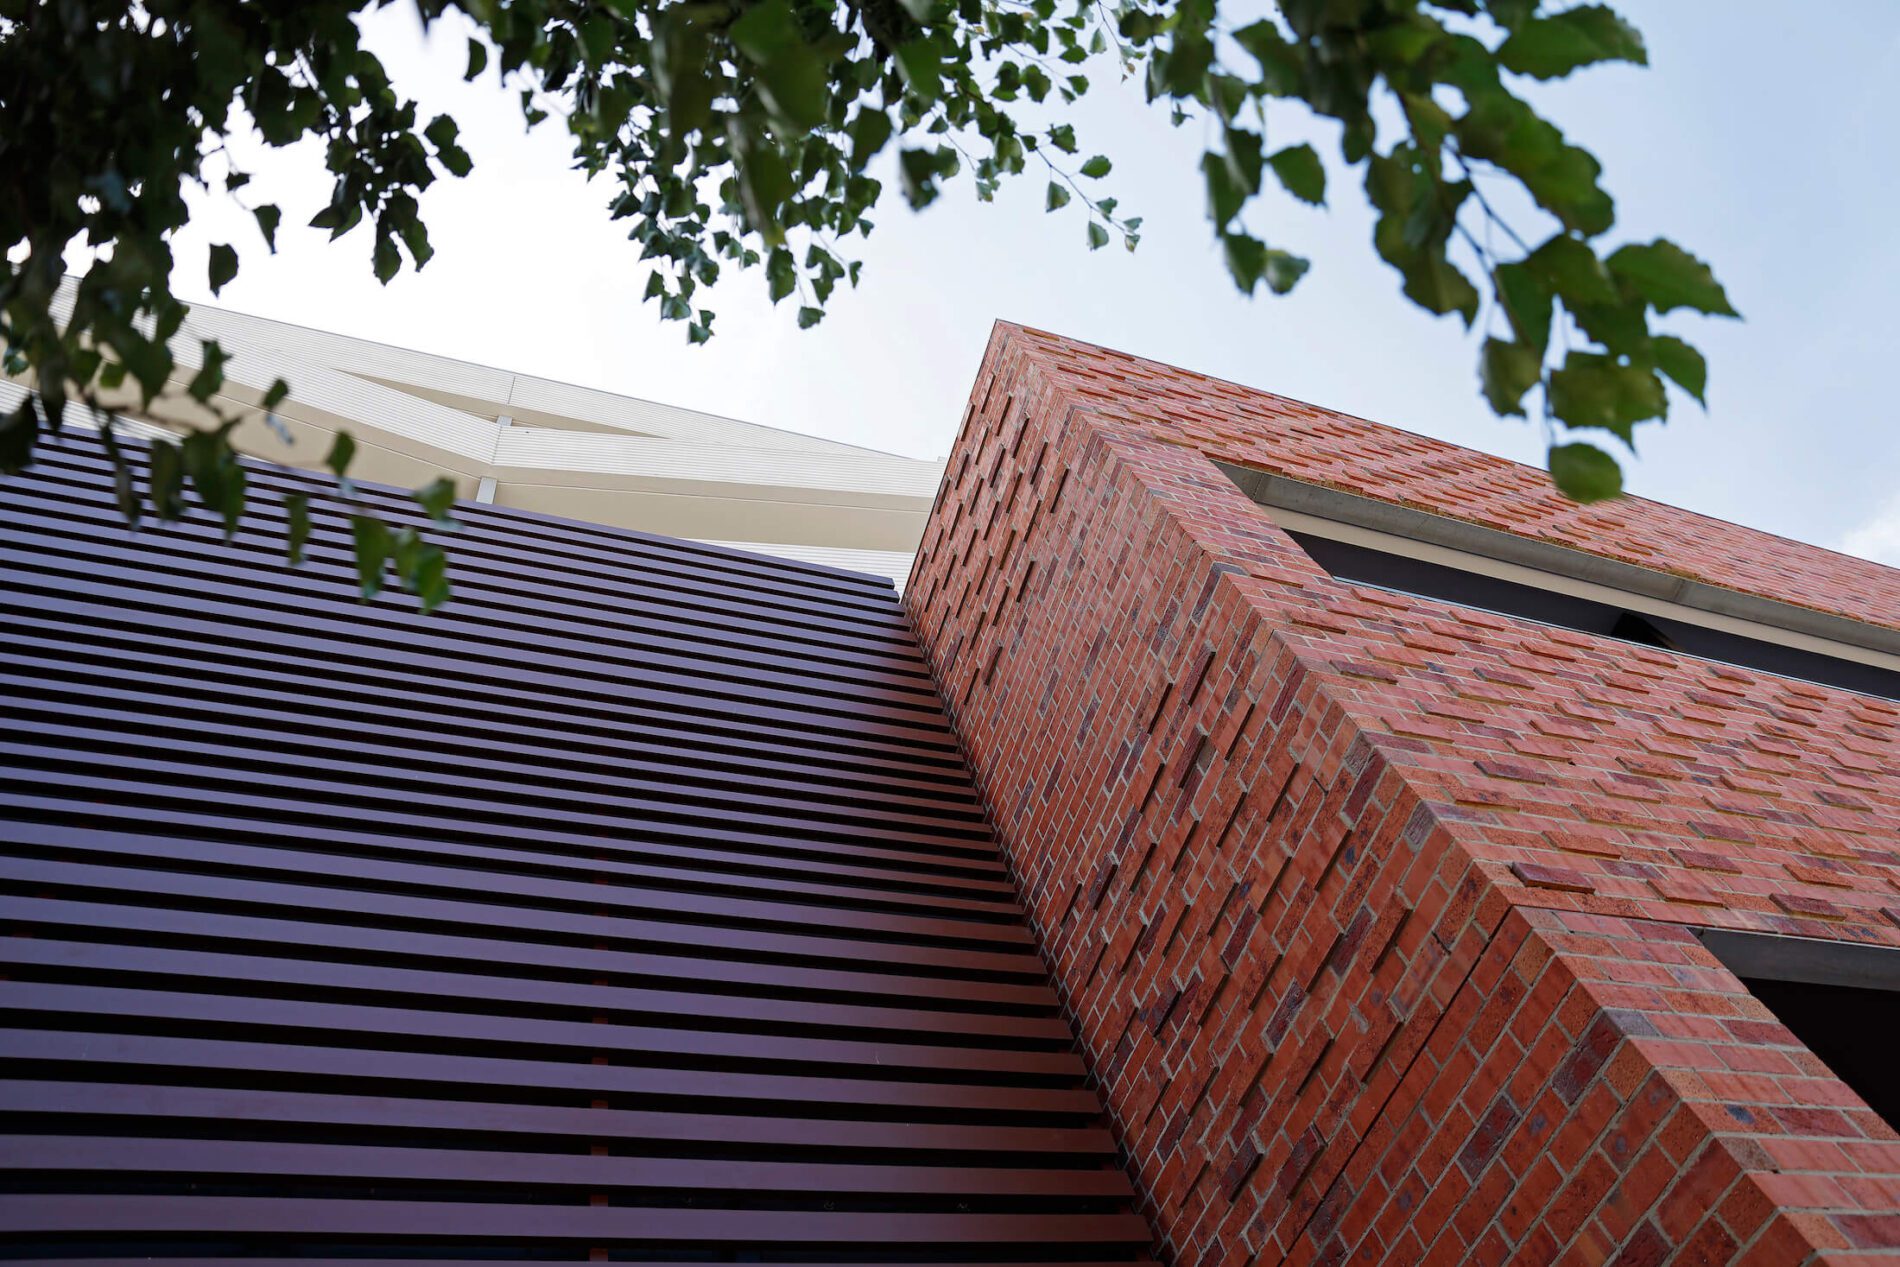 View looking up at brick residential building